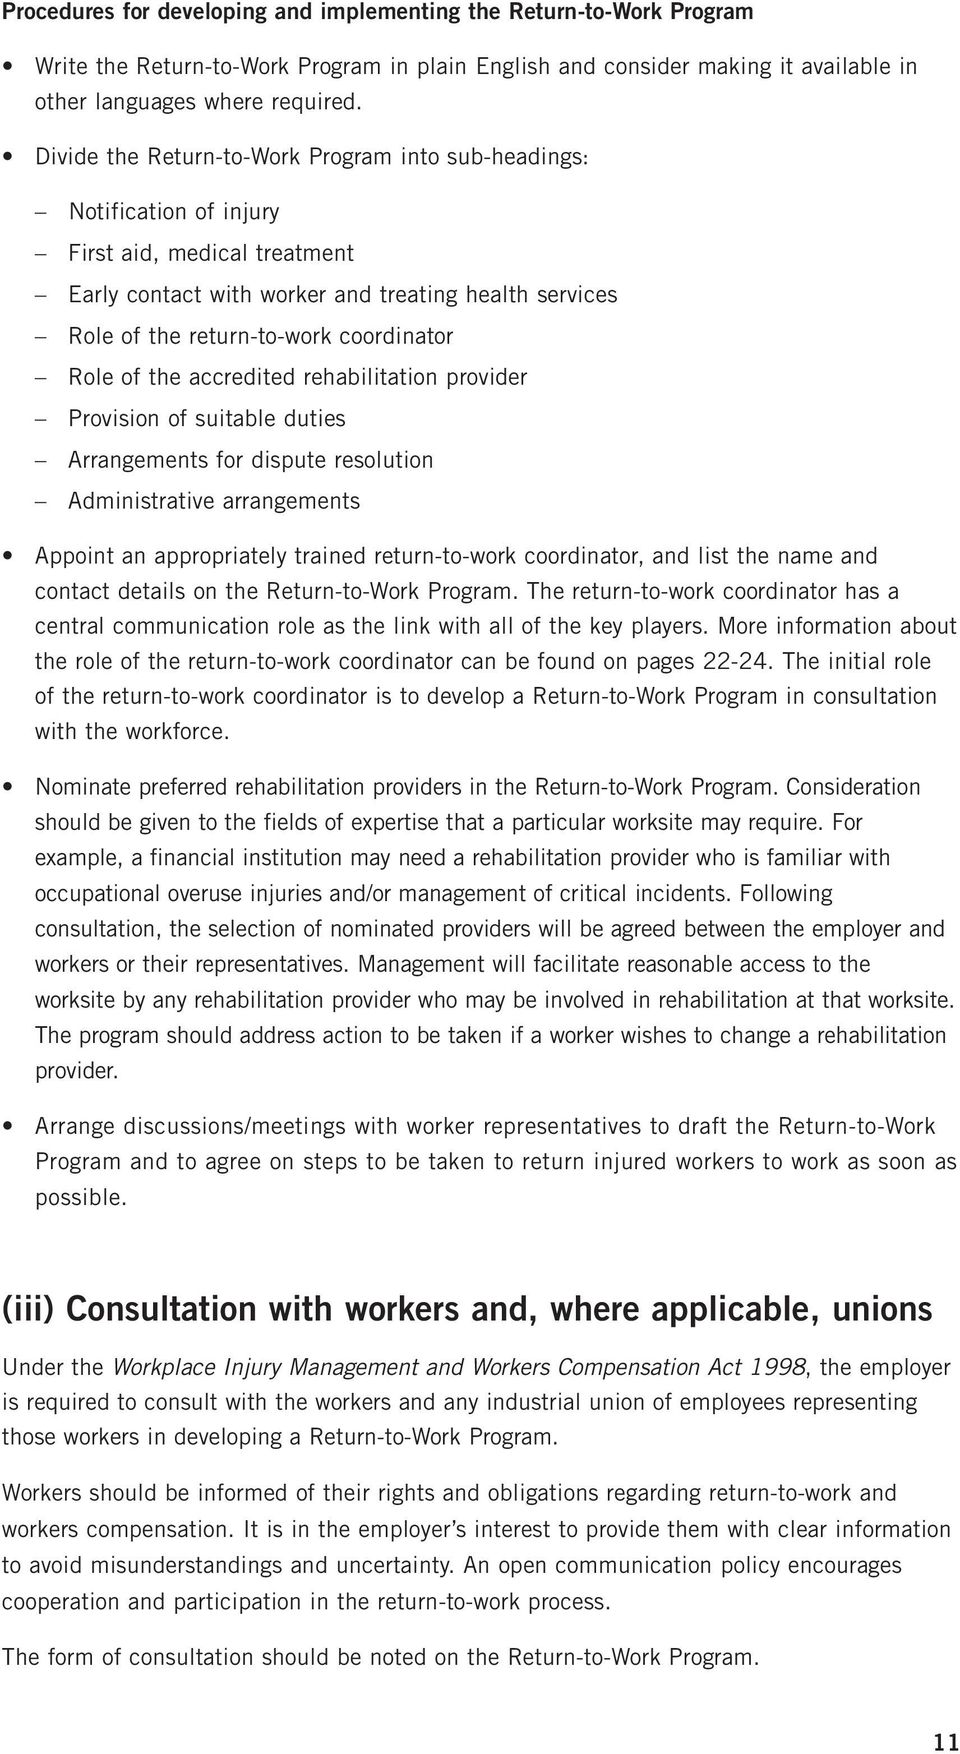 Role of the accredited rehabilitation provider Provision of suitable duties Arrangements for dispute resolution Administrative arrangements Appoint an appropriately trained return-to-work